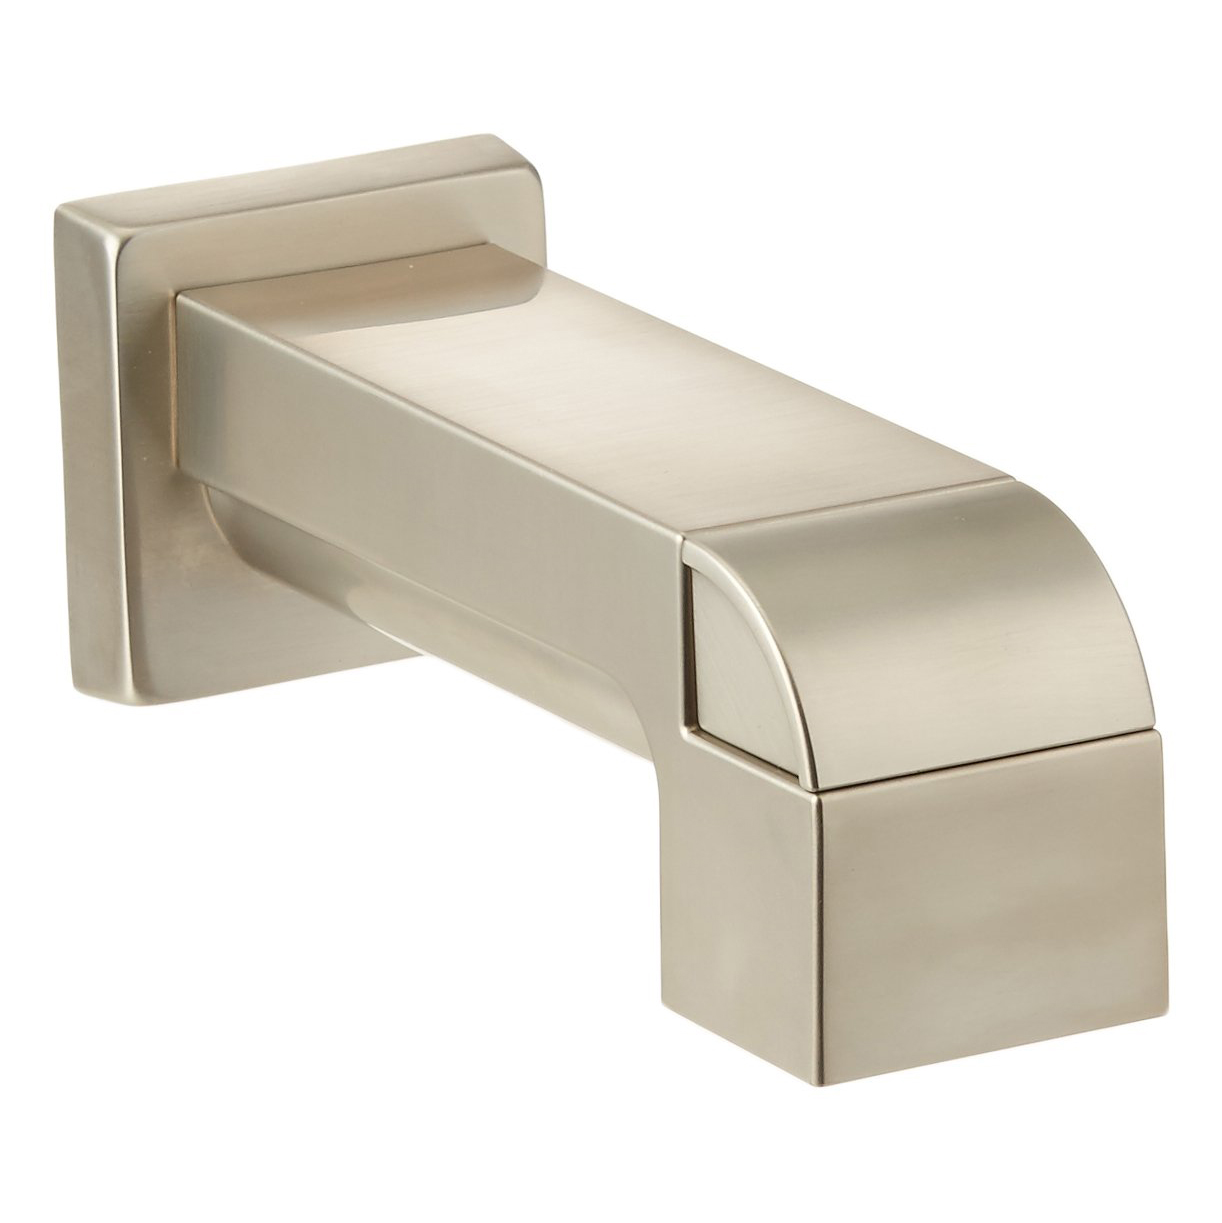 Ara Pull-Up Diverter Tub Spout in Stainless